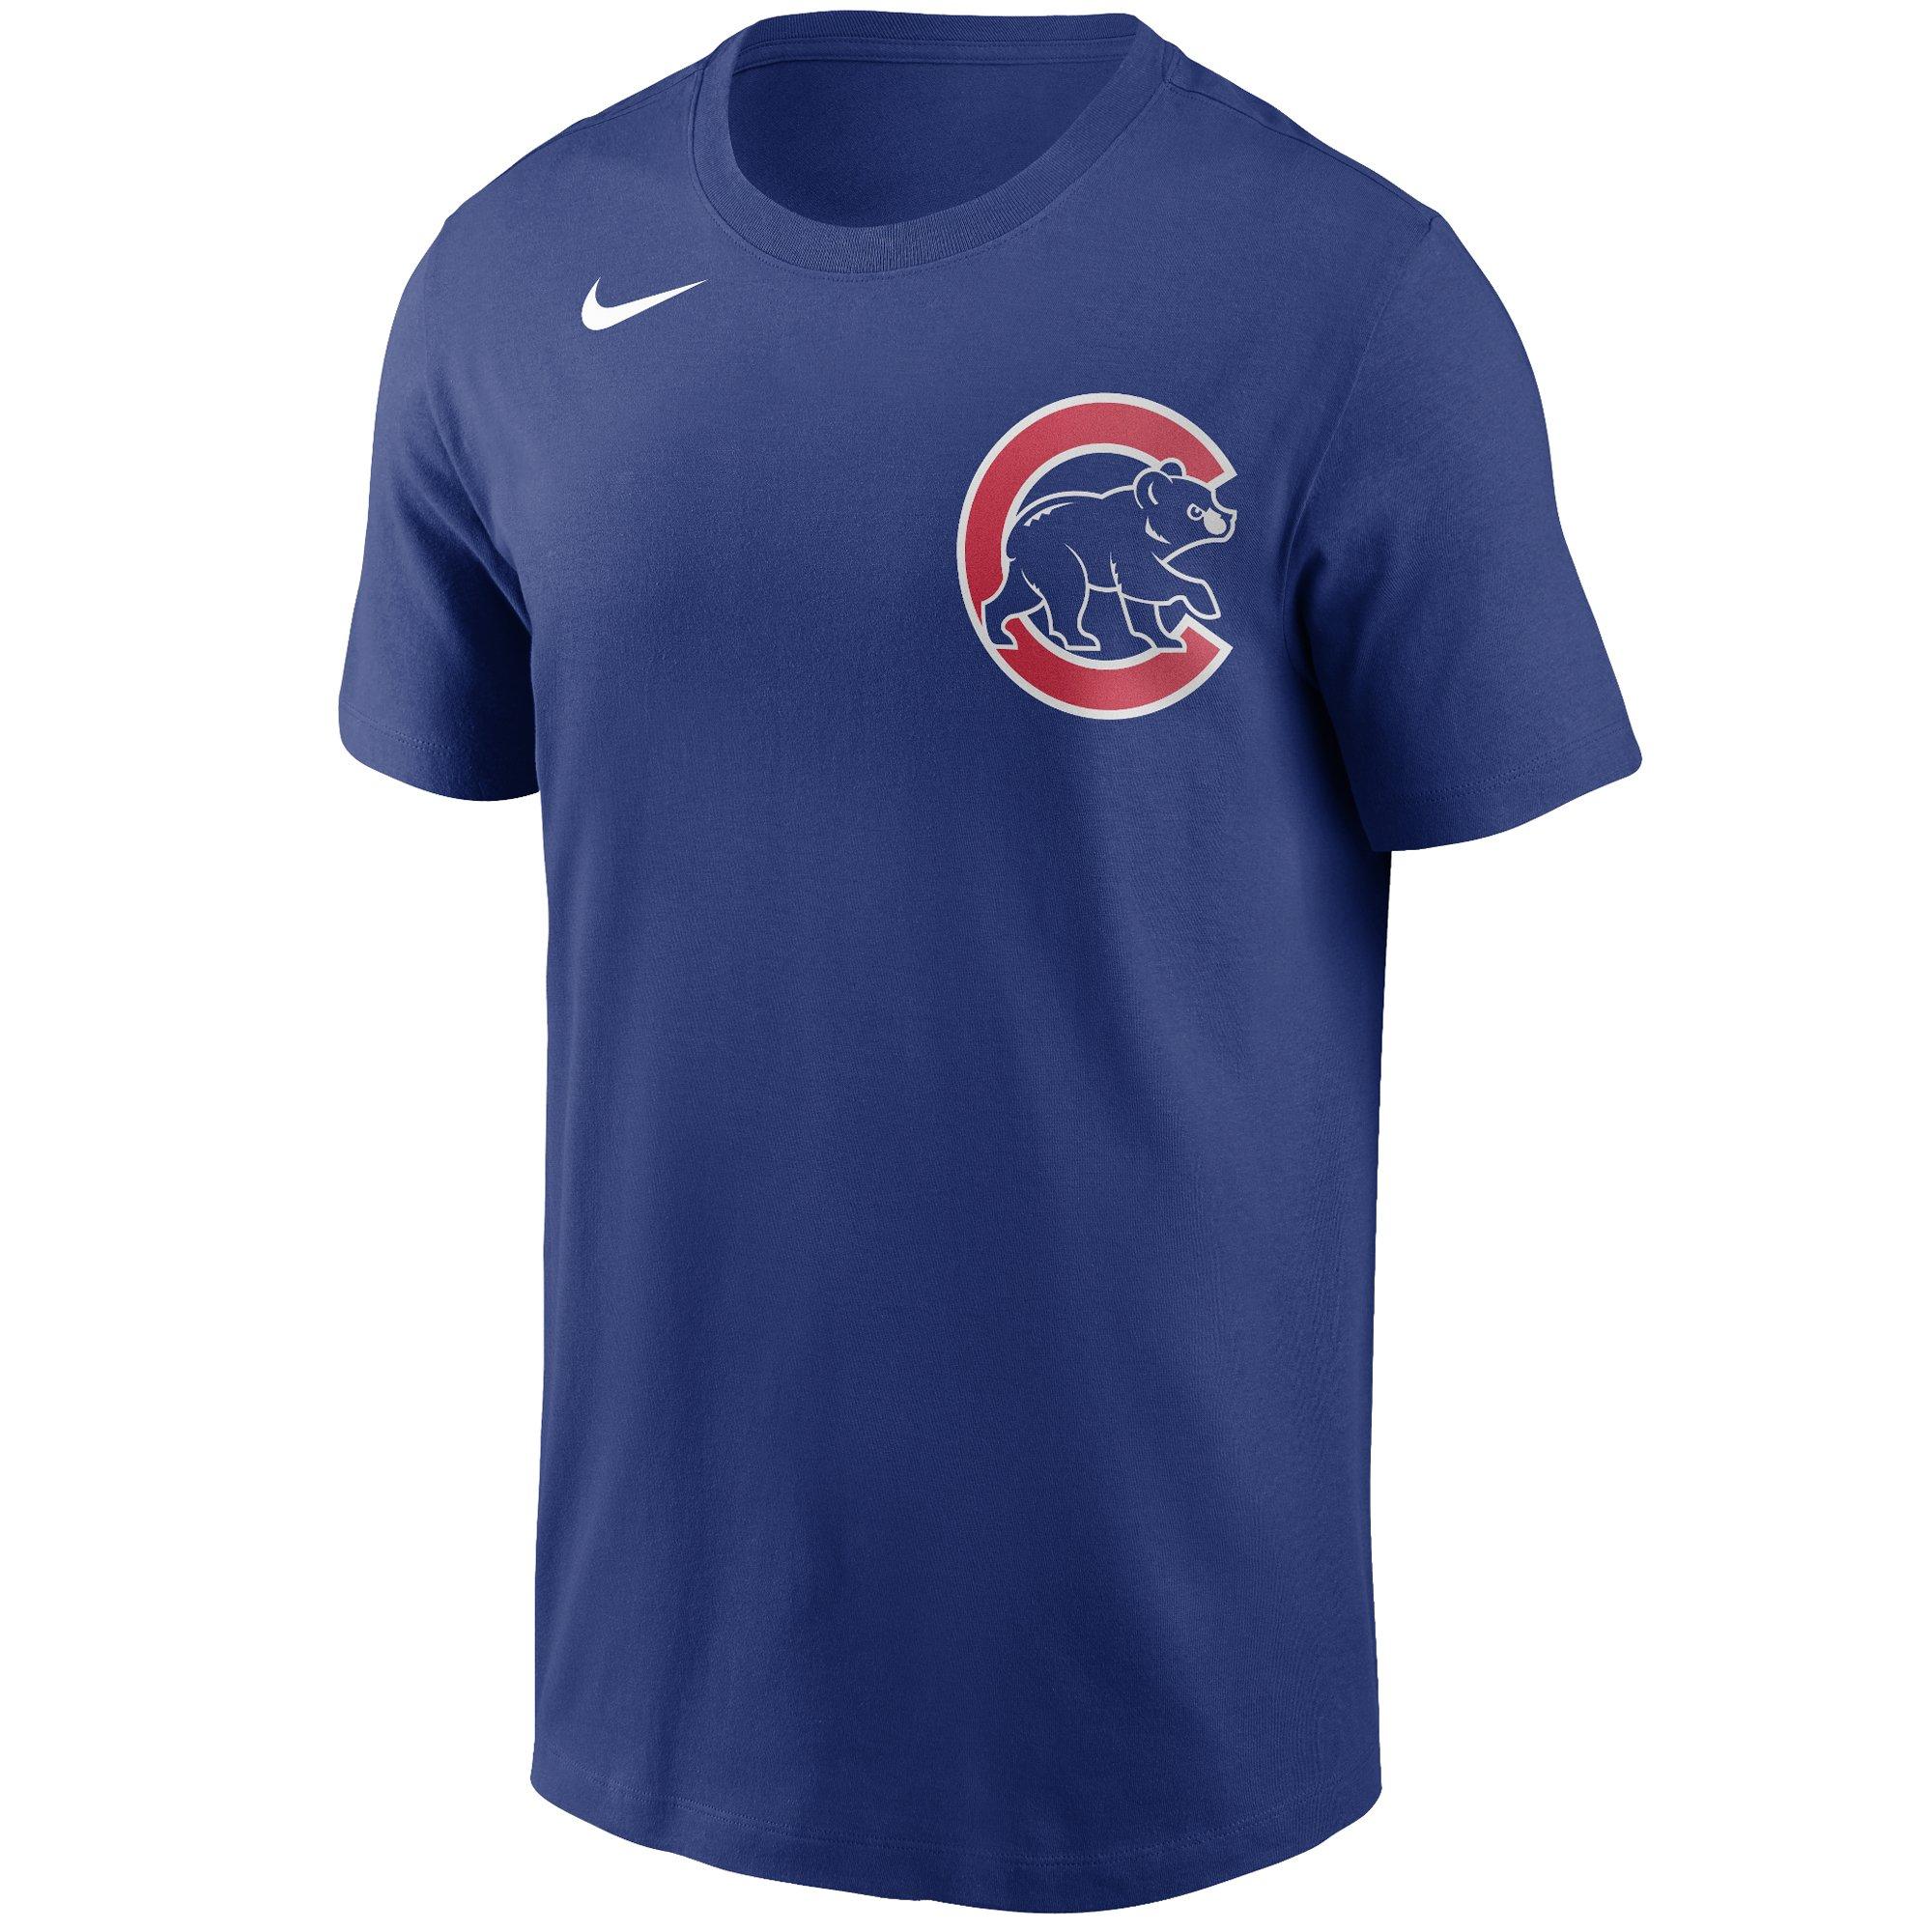 Toddler Nike Anthony Rizzo Royal Chicago Cubs Player Name & Number T-Shirt